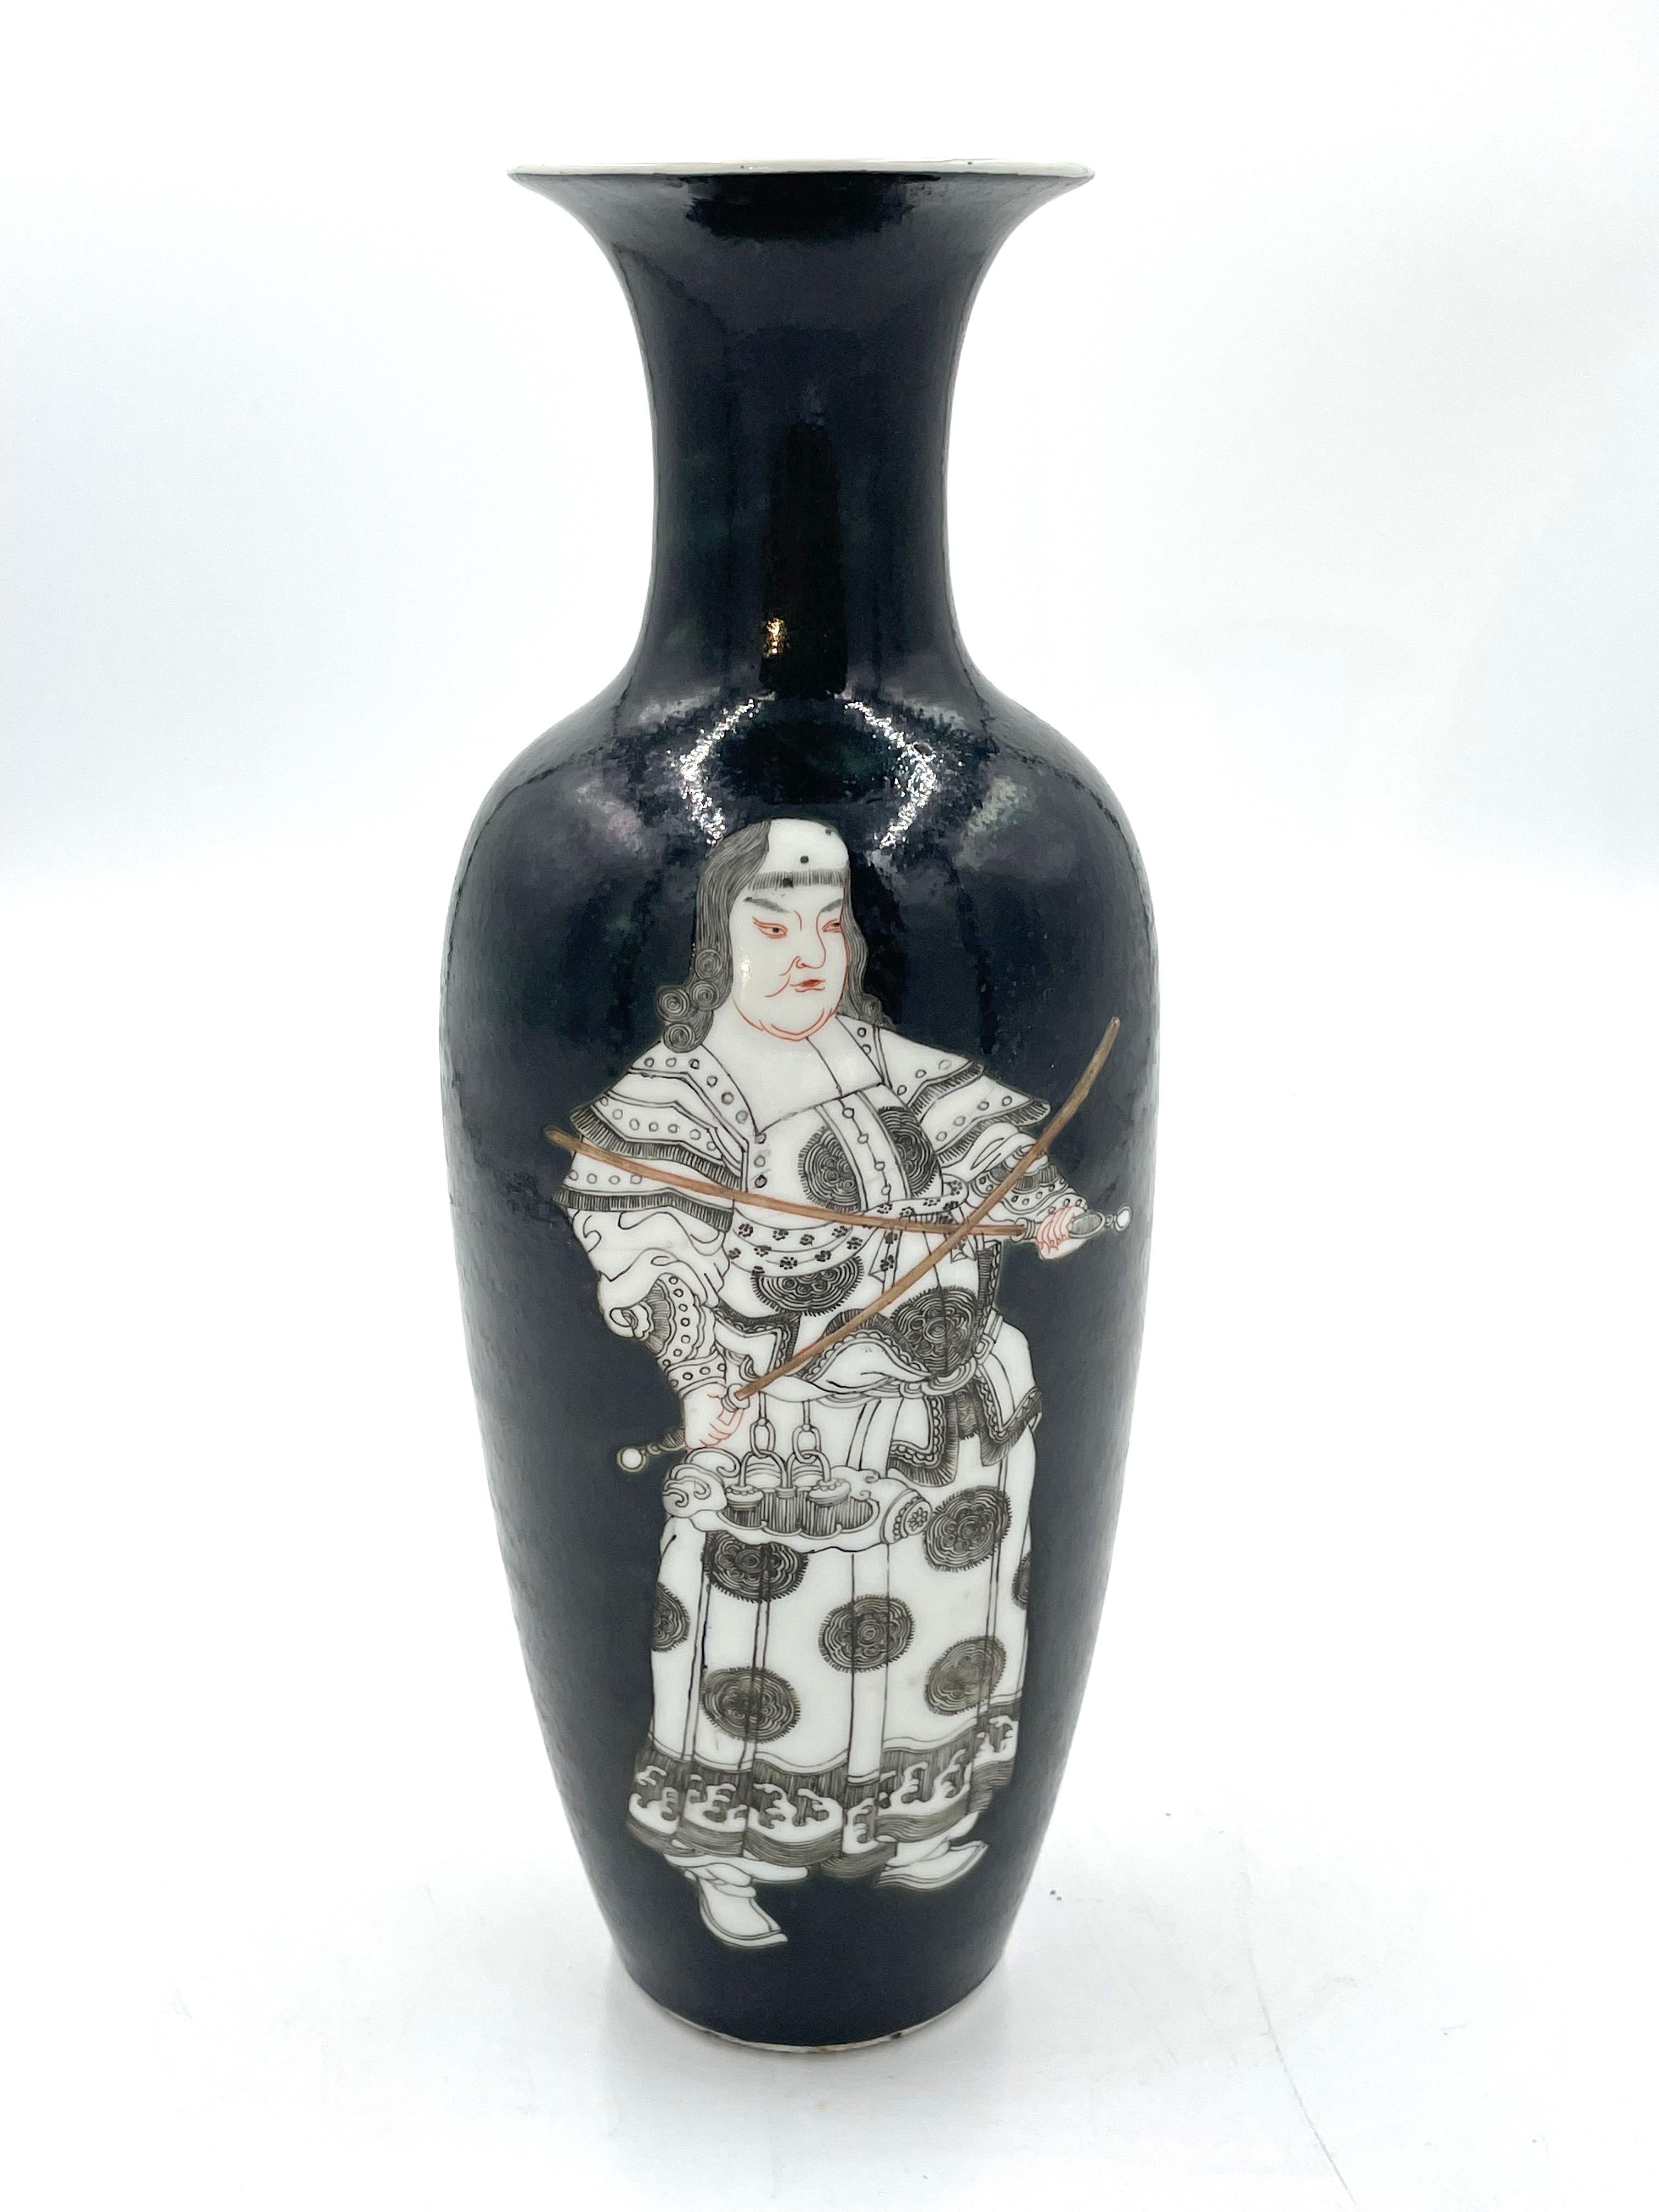 18th Century Chinese Vase with Two Figures, Qing Emperor Kangxi Period